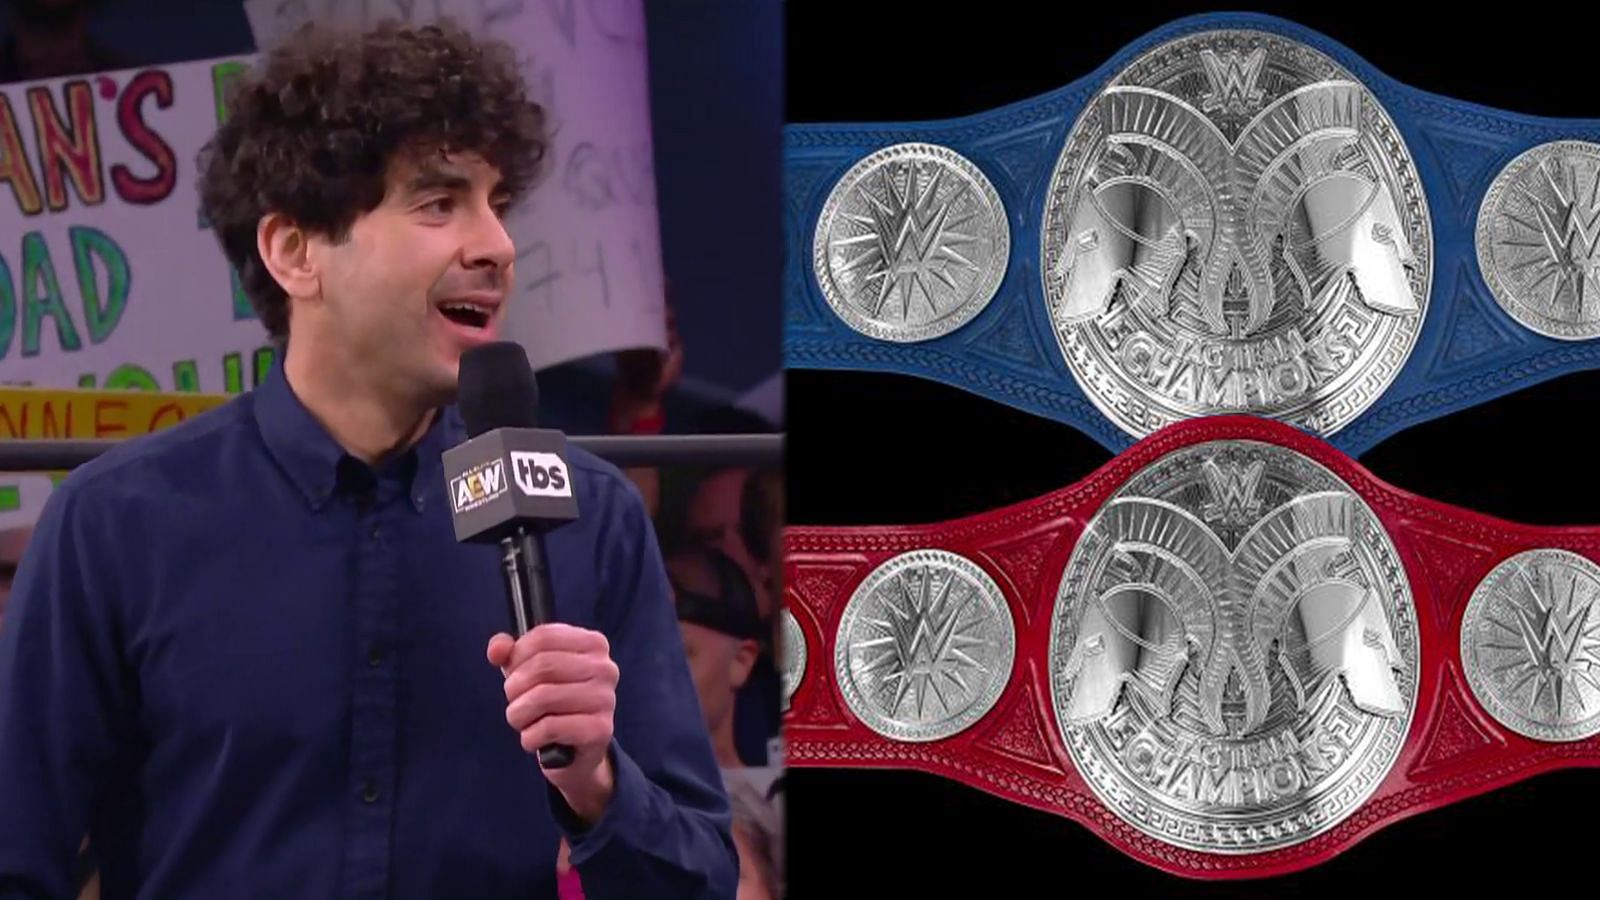 Tony Khan has signed some of the biggest stars in wrestling over the past 3 years.